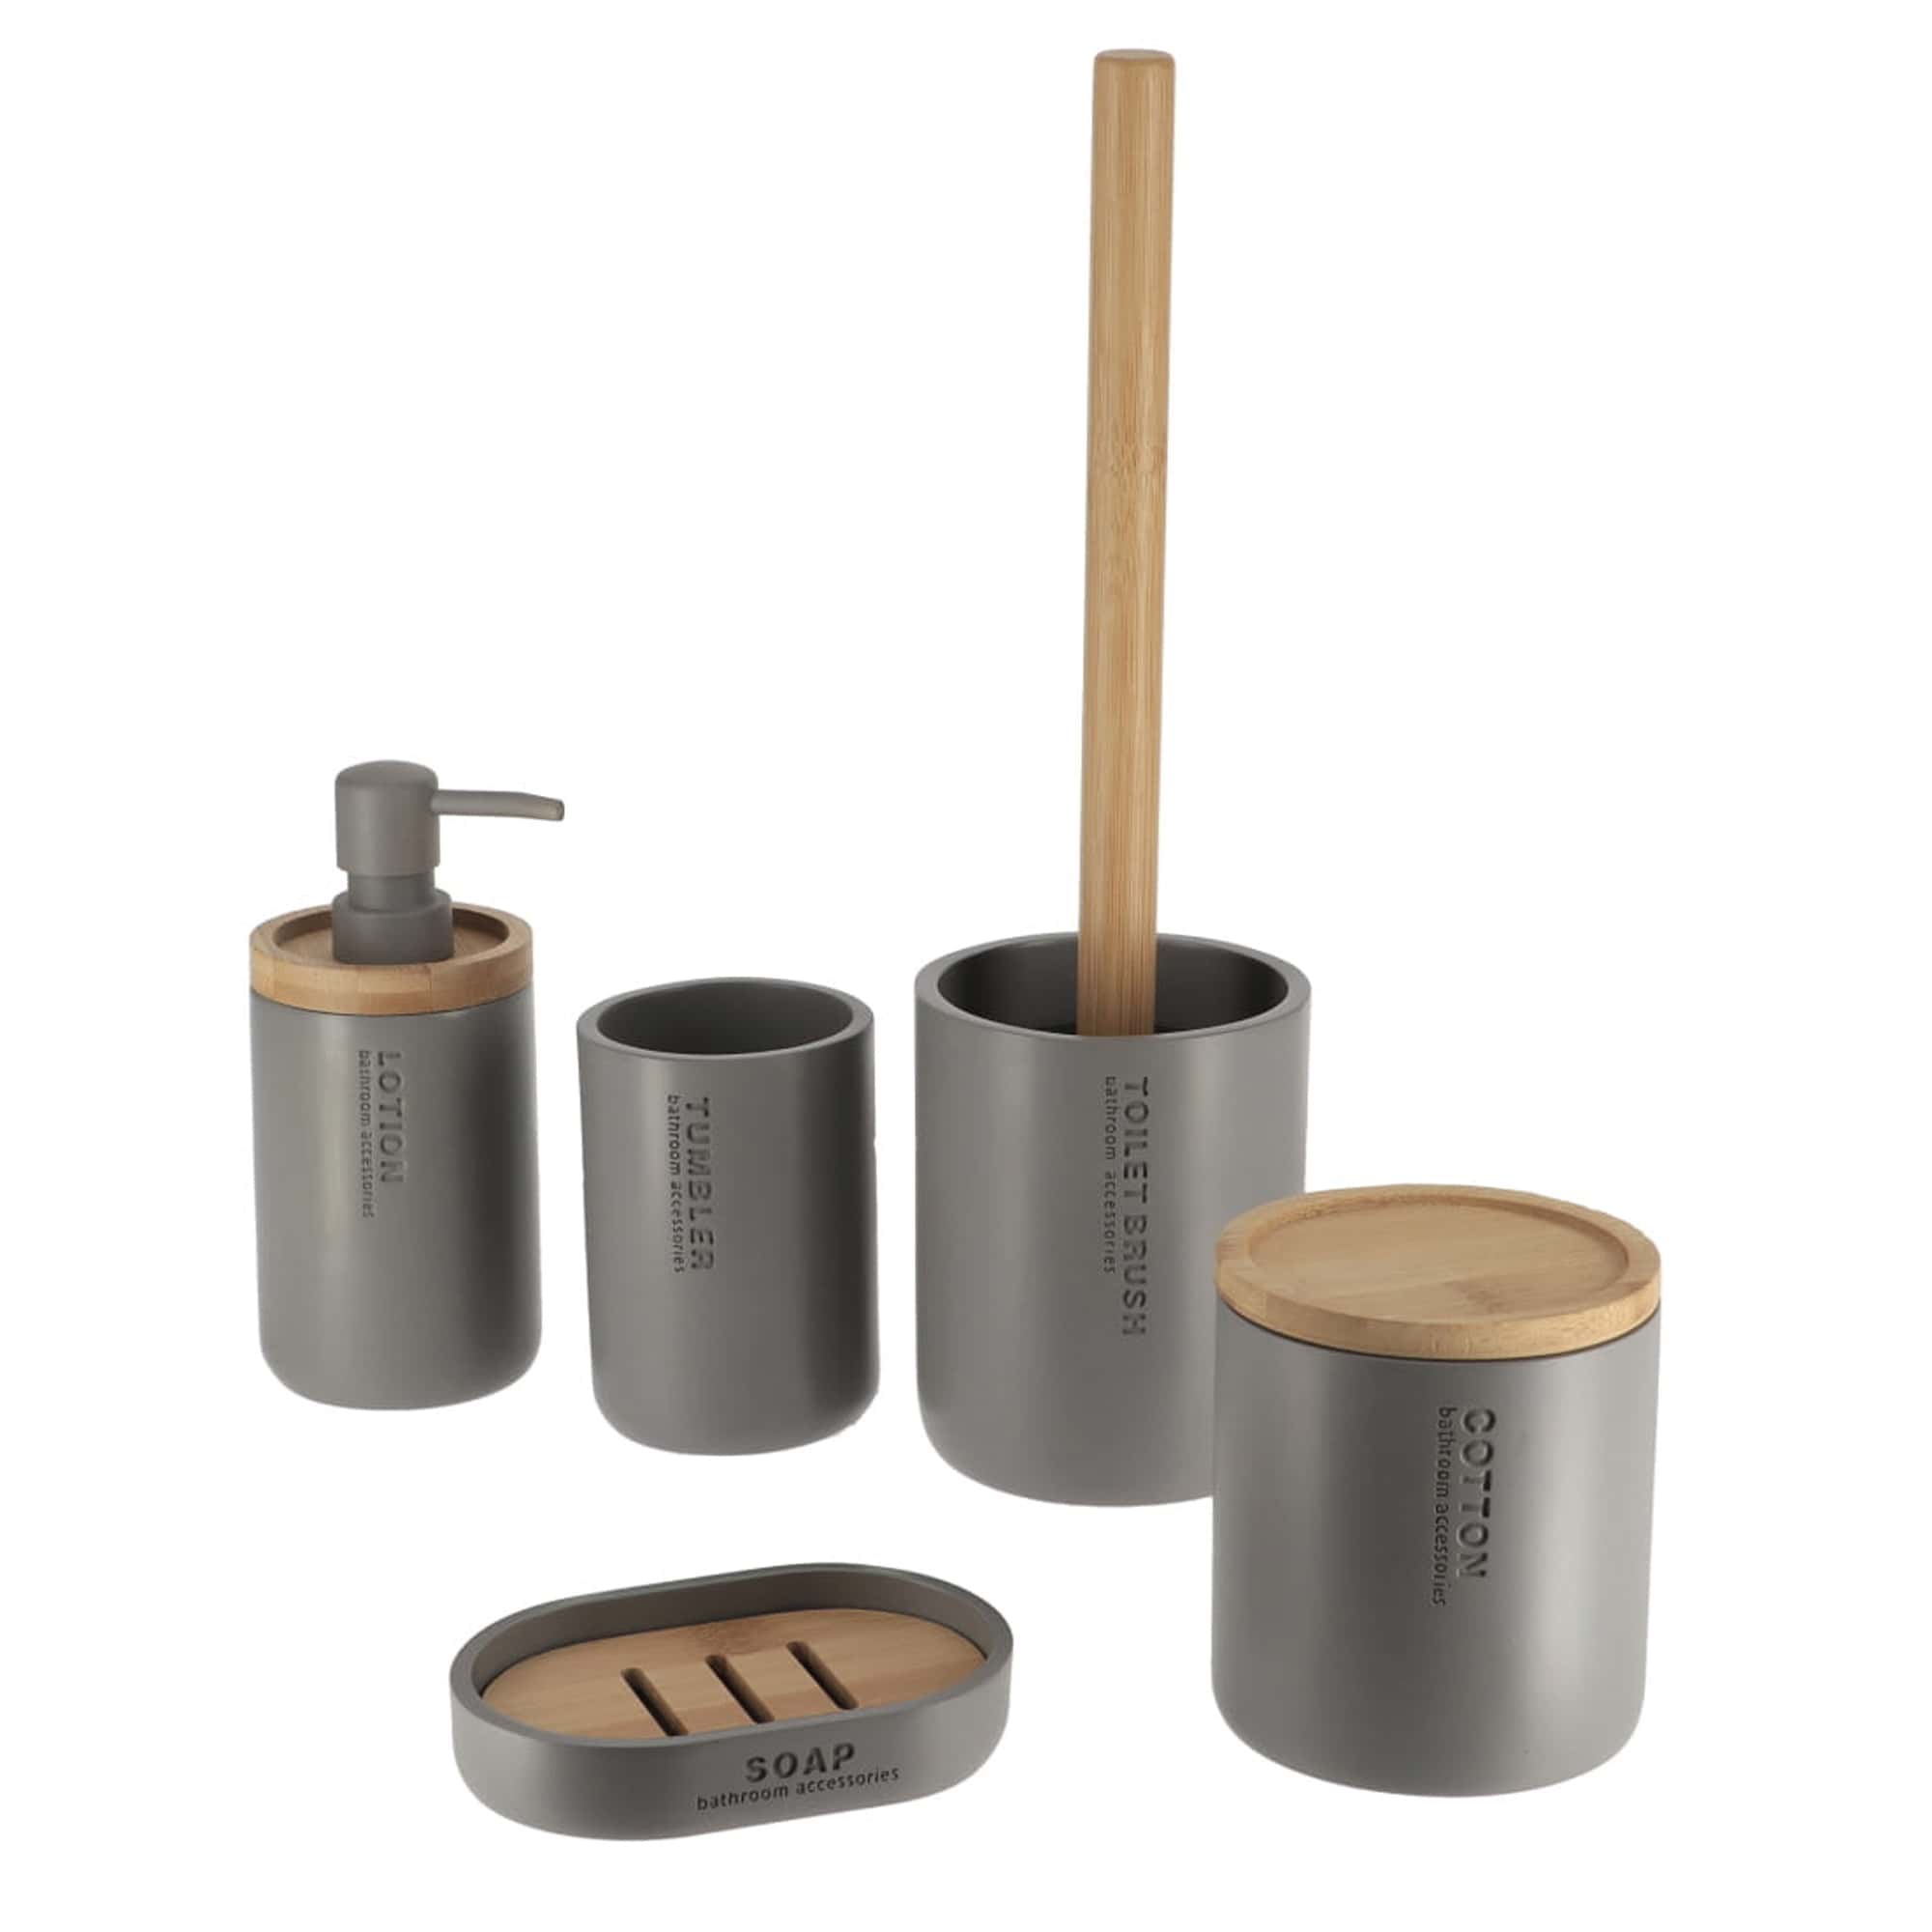 Contemporary Gray Bathroom Set with Bamboo Touch 5 pieces Hand Soap Pump, Toothbrush Holder, Toilet Brush Cleaner, Cotton Pot and Soap Cup